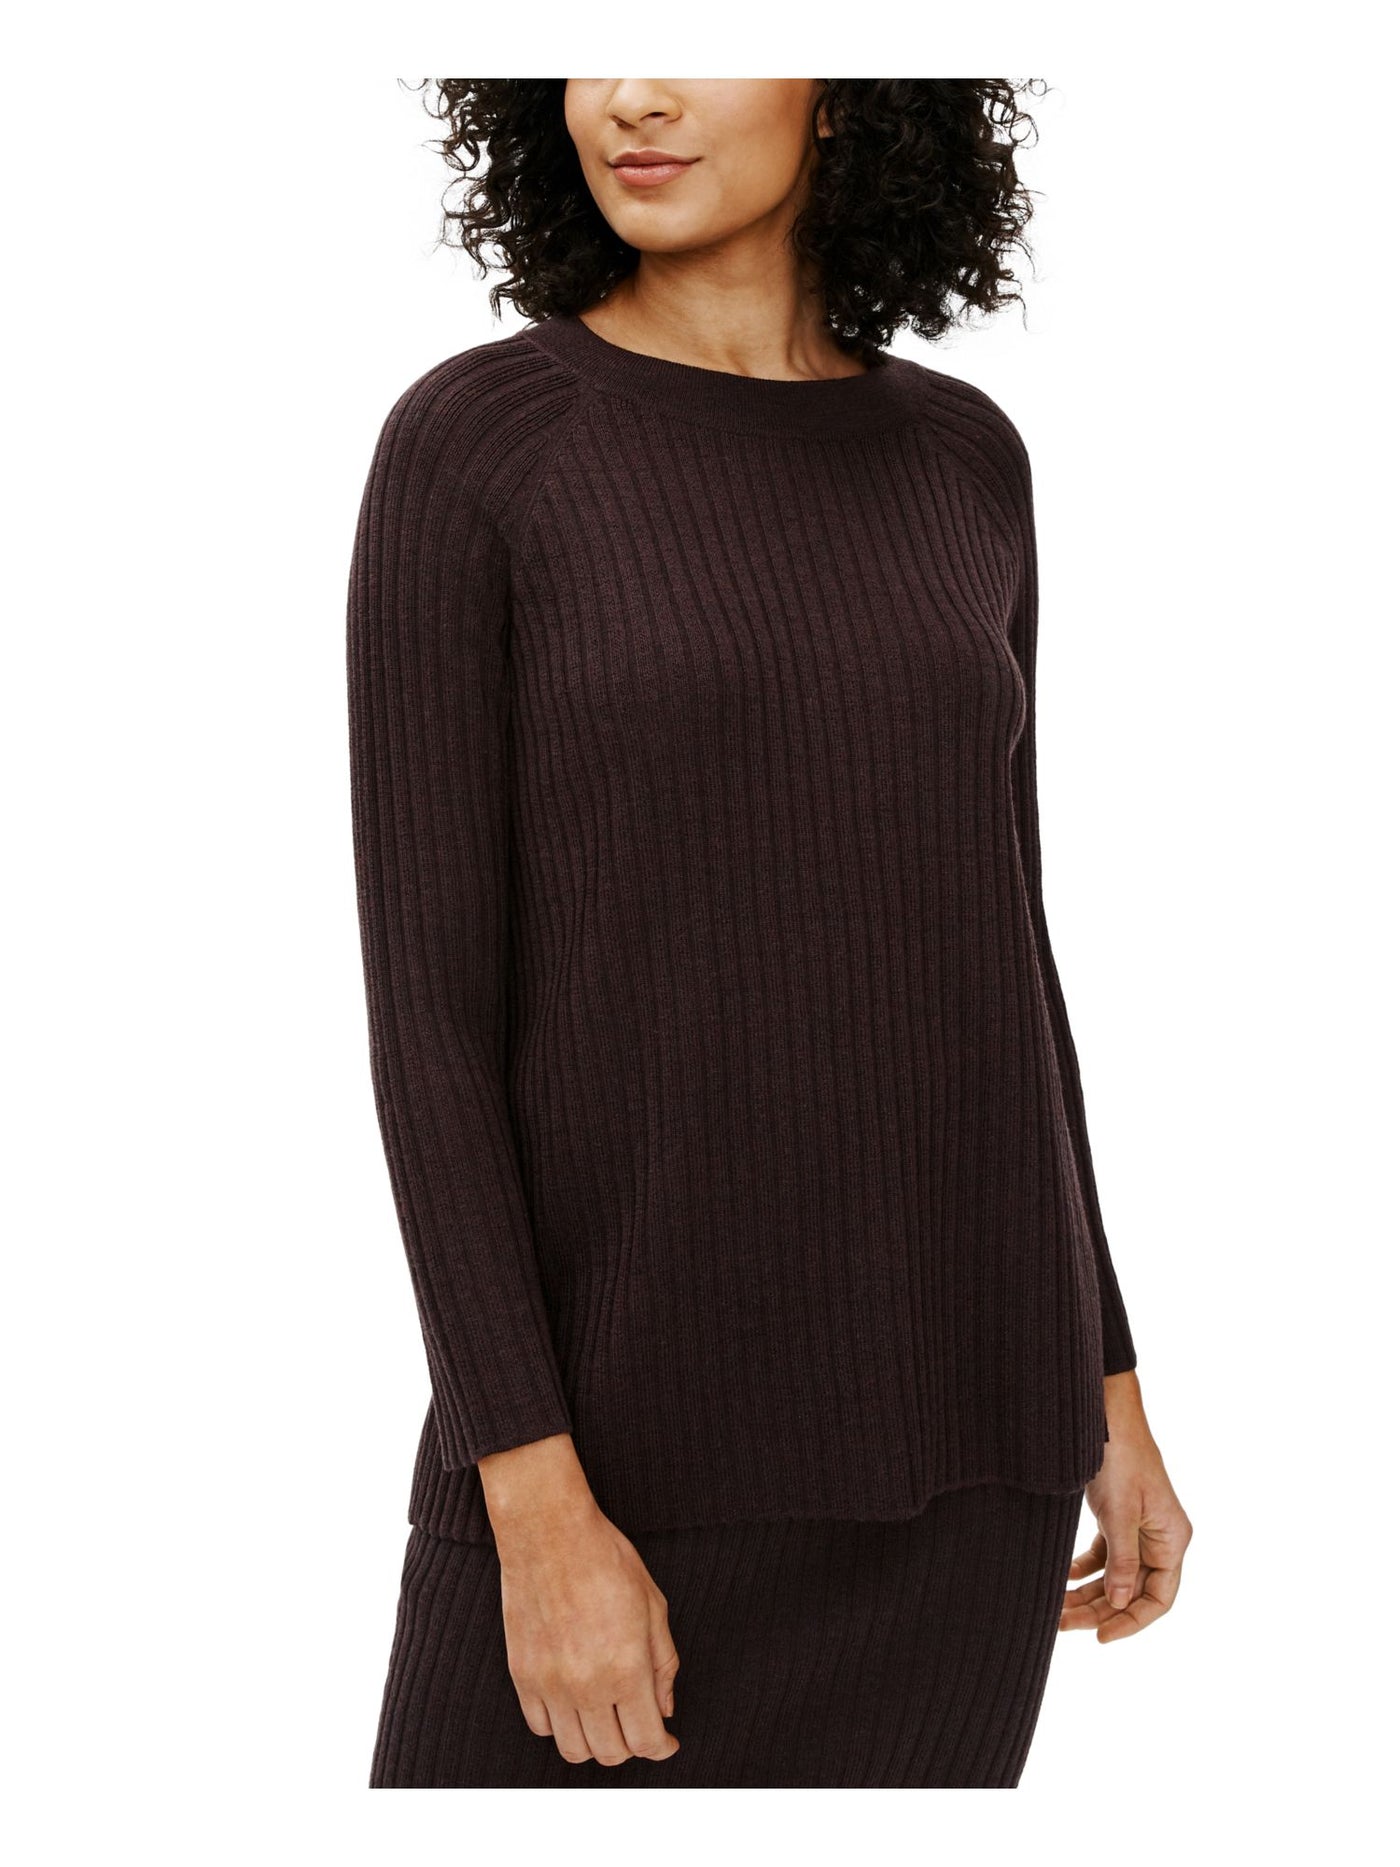 EILEEN FISHER Womens Brown Stretch Ribbed Long Sleeve Crew Neck Sweater M